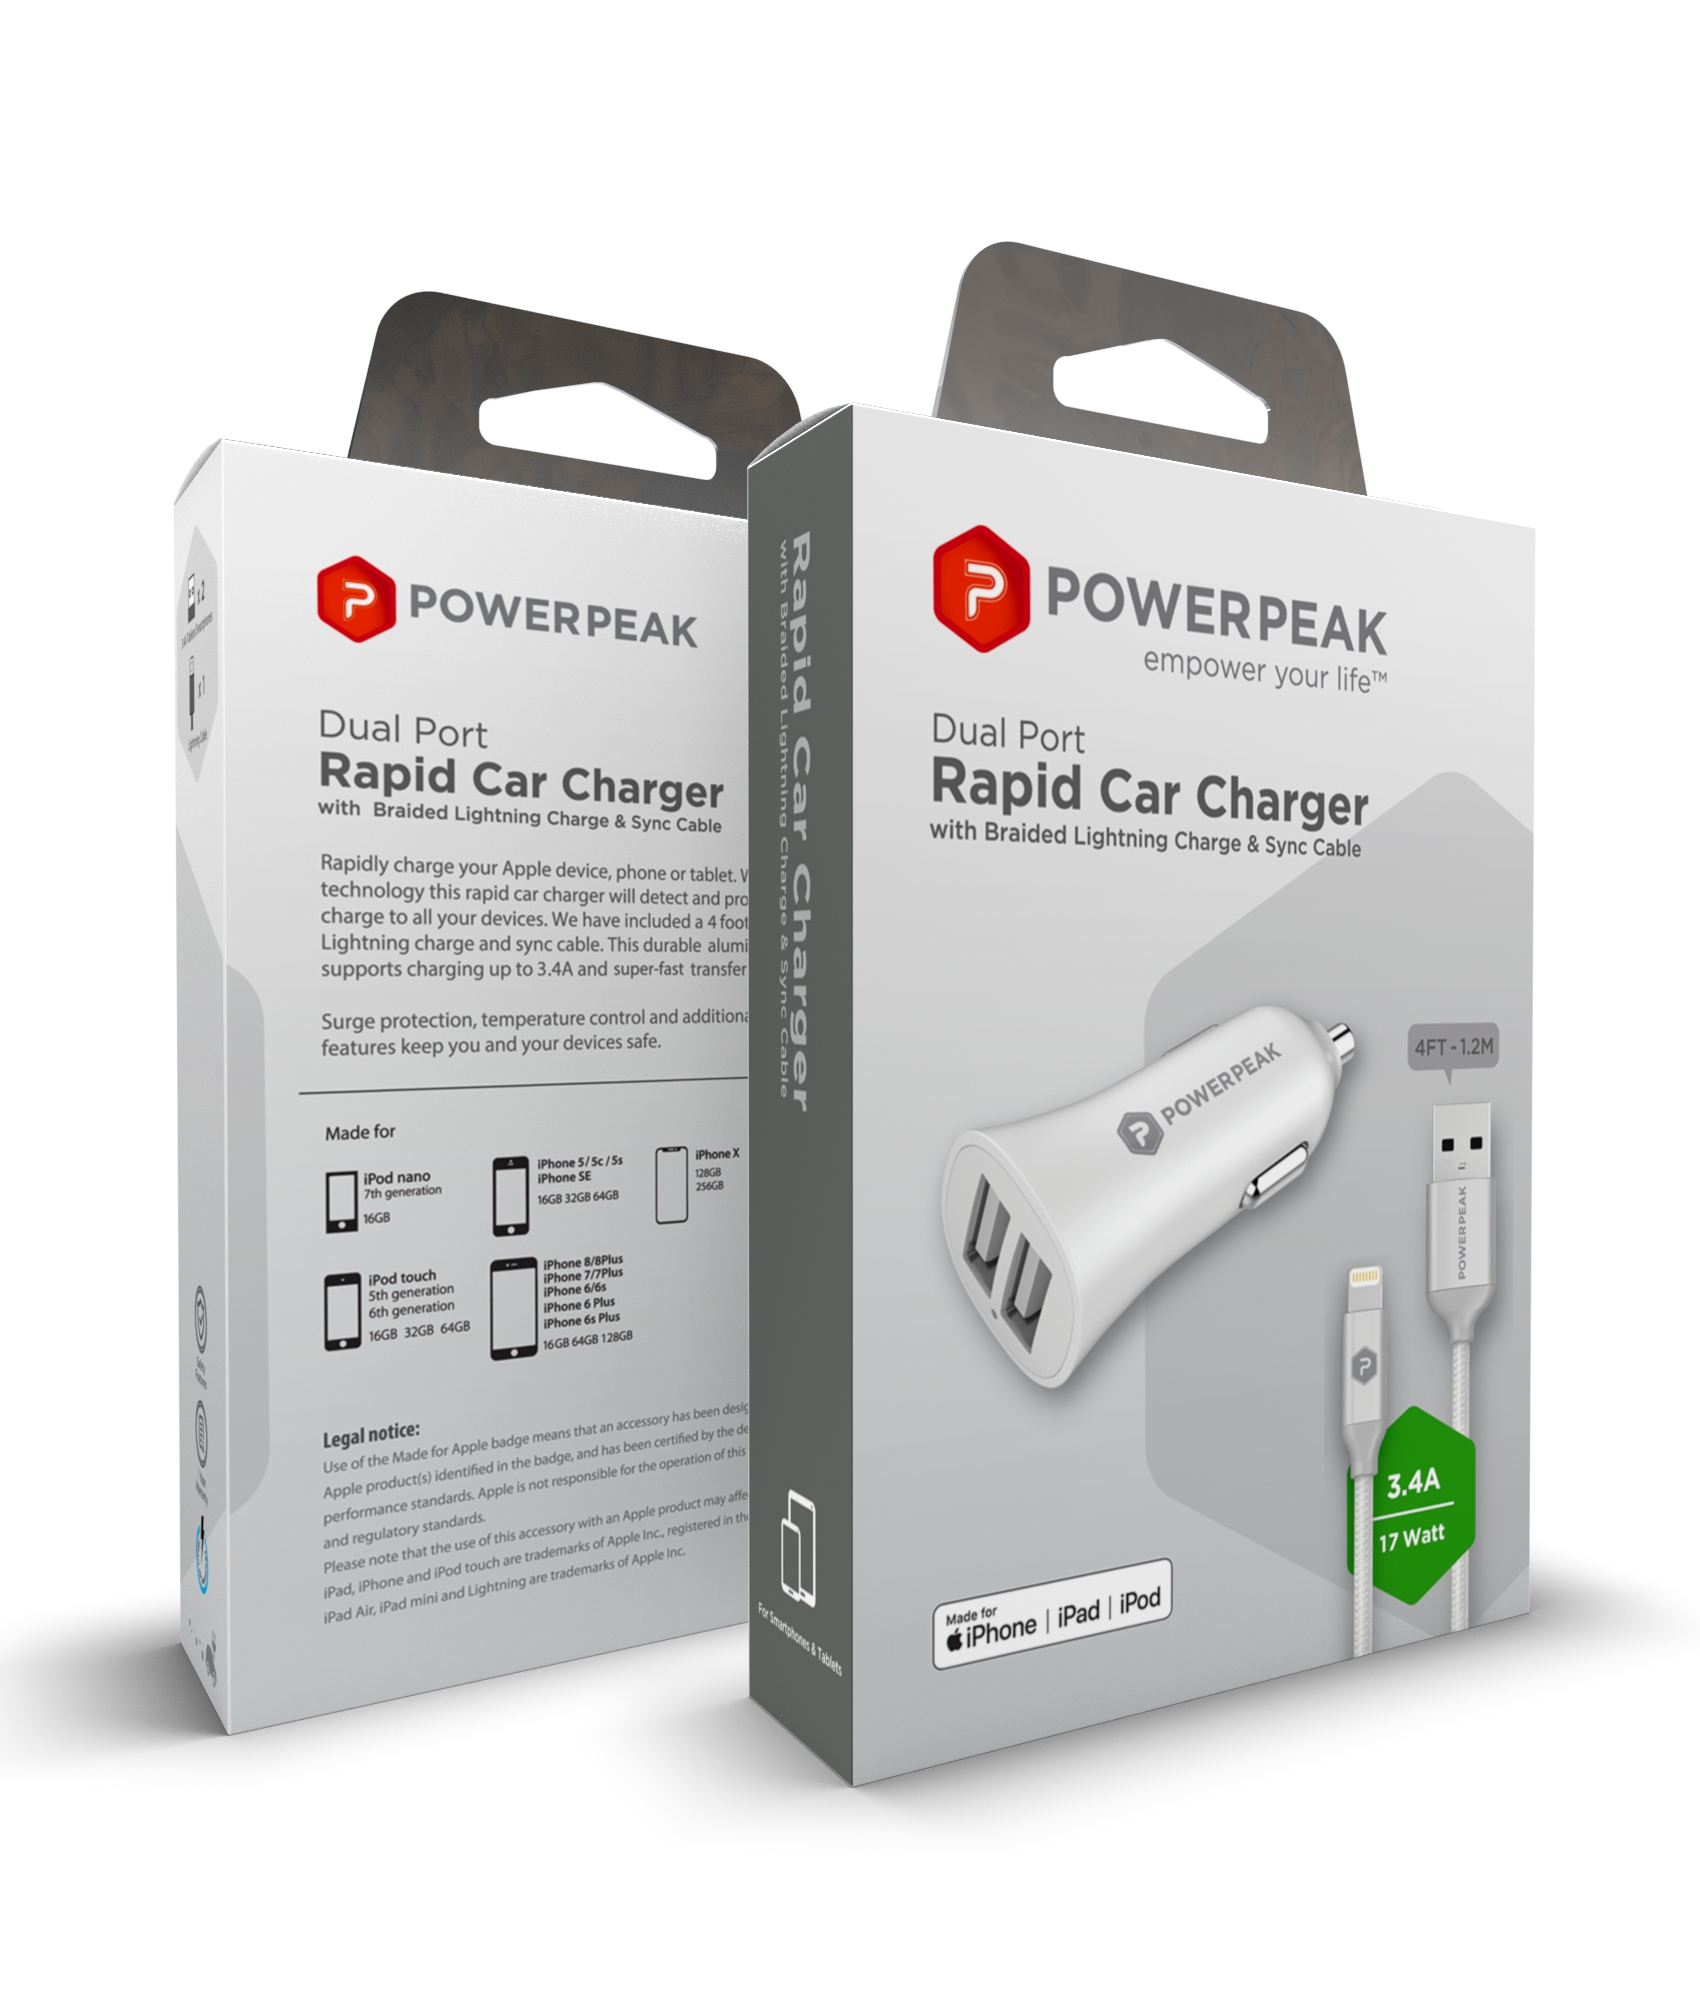 PowerPeak Dual Port Rapid Car Charger with Braided Lightning Charge & Sync Cable - WHITE (3.4 AMPS)